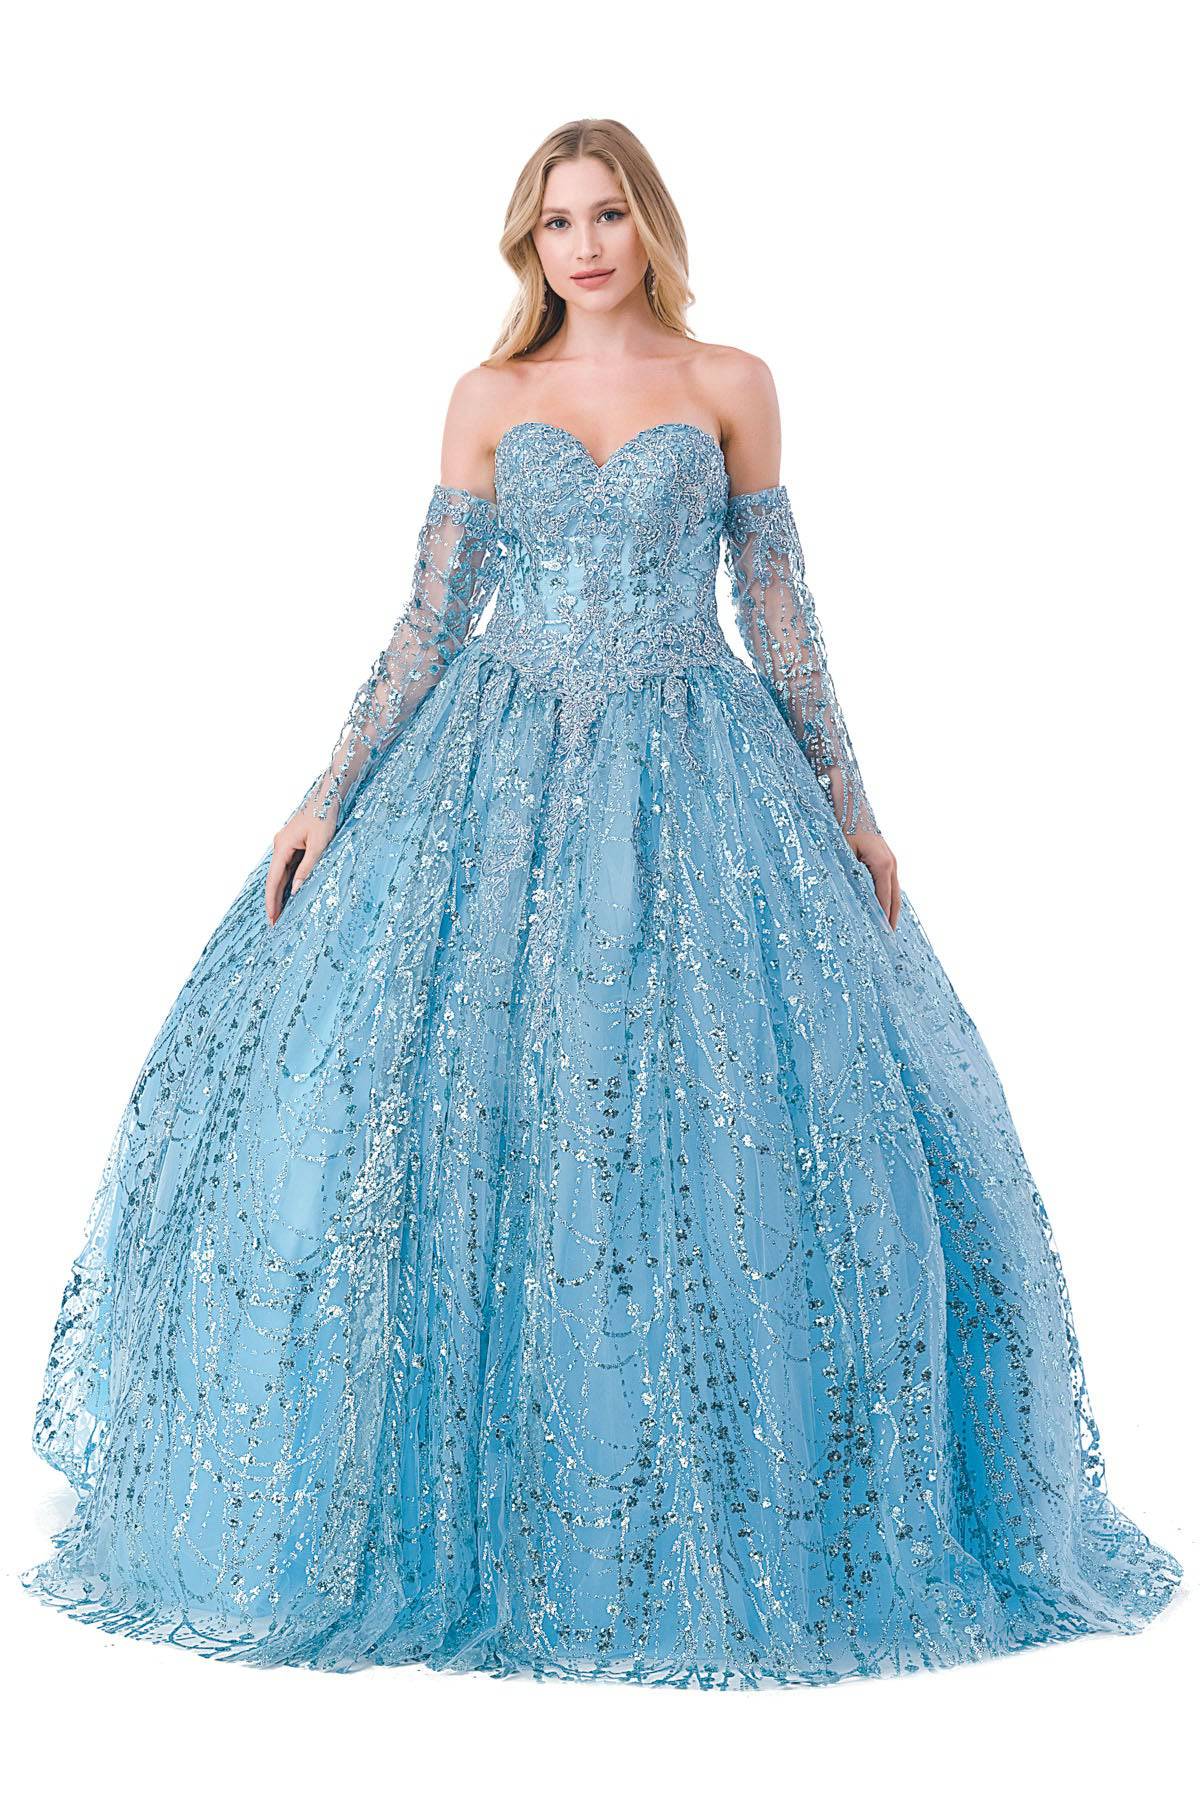 Aspeed L2460 Off Shoulder Sleeved Sequin Ball Gown - NORMA REED